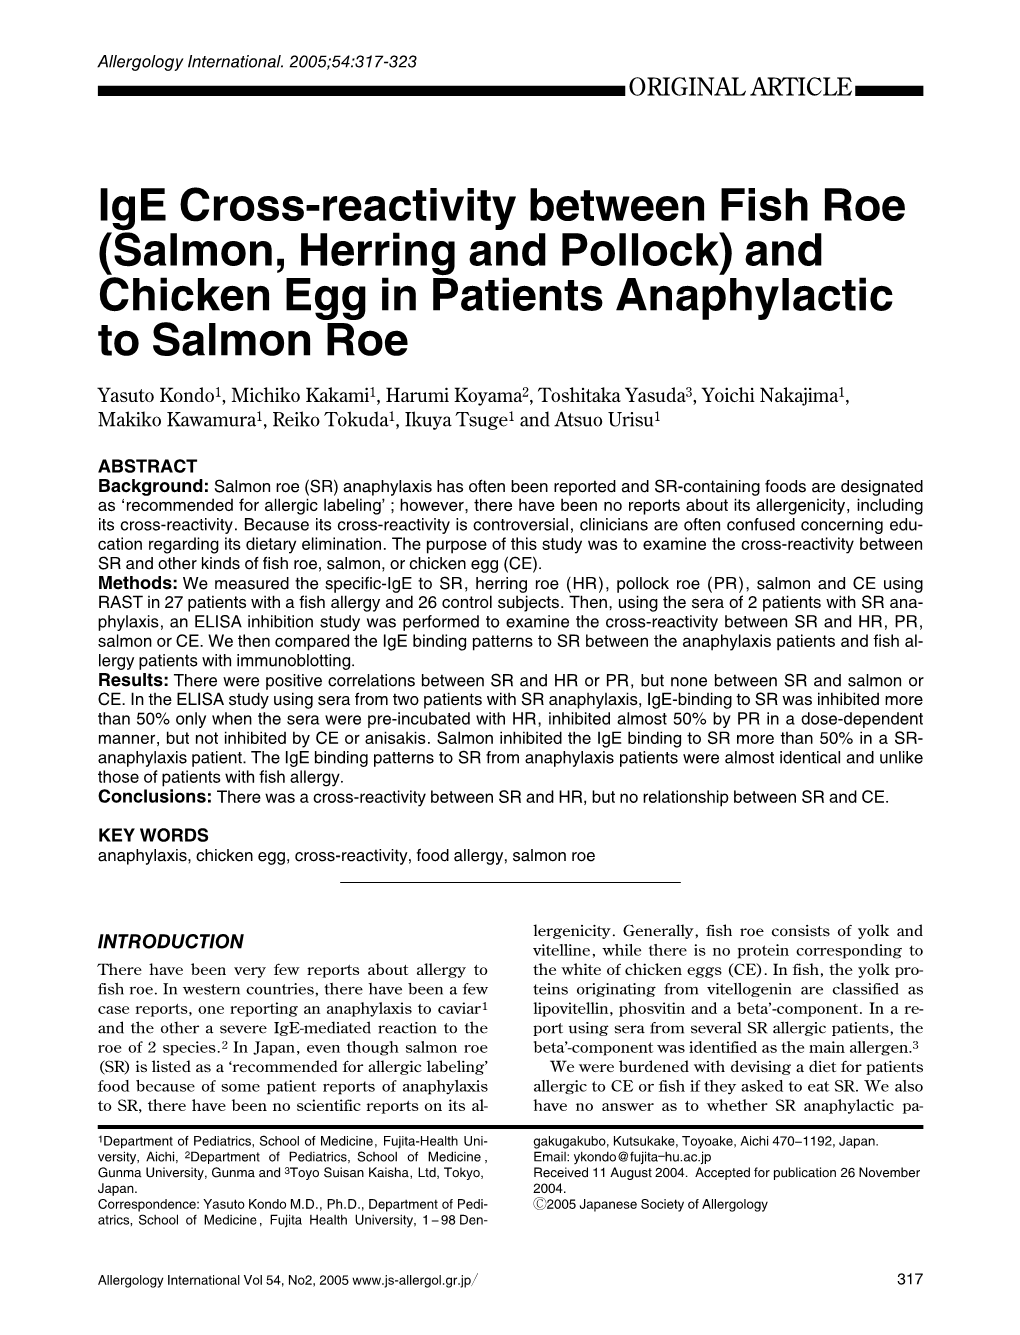 Ige Cross-Reactivity Between Fish Roe (Salmon, Herring and Pollock) and Chicken Egg in Patients Anaphylactic to Salmon Roe